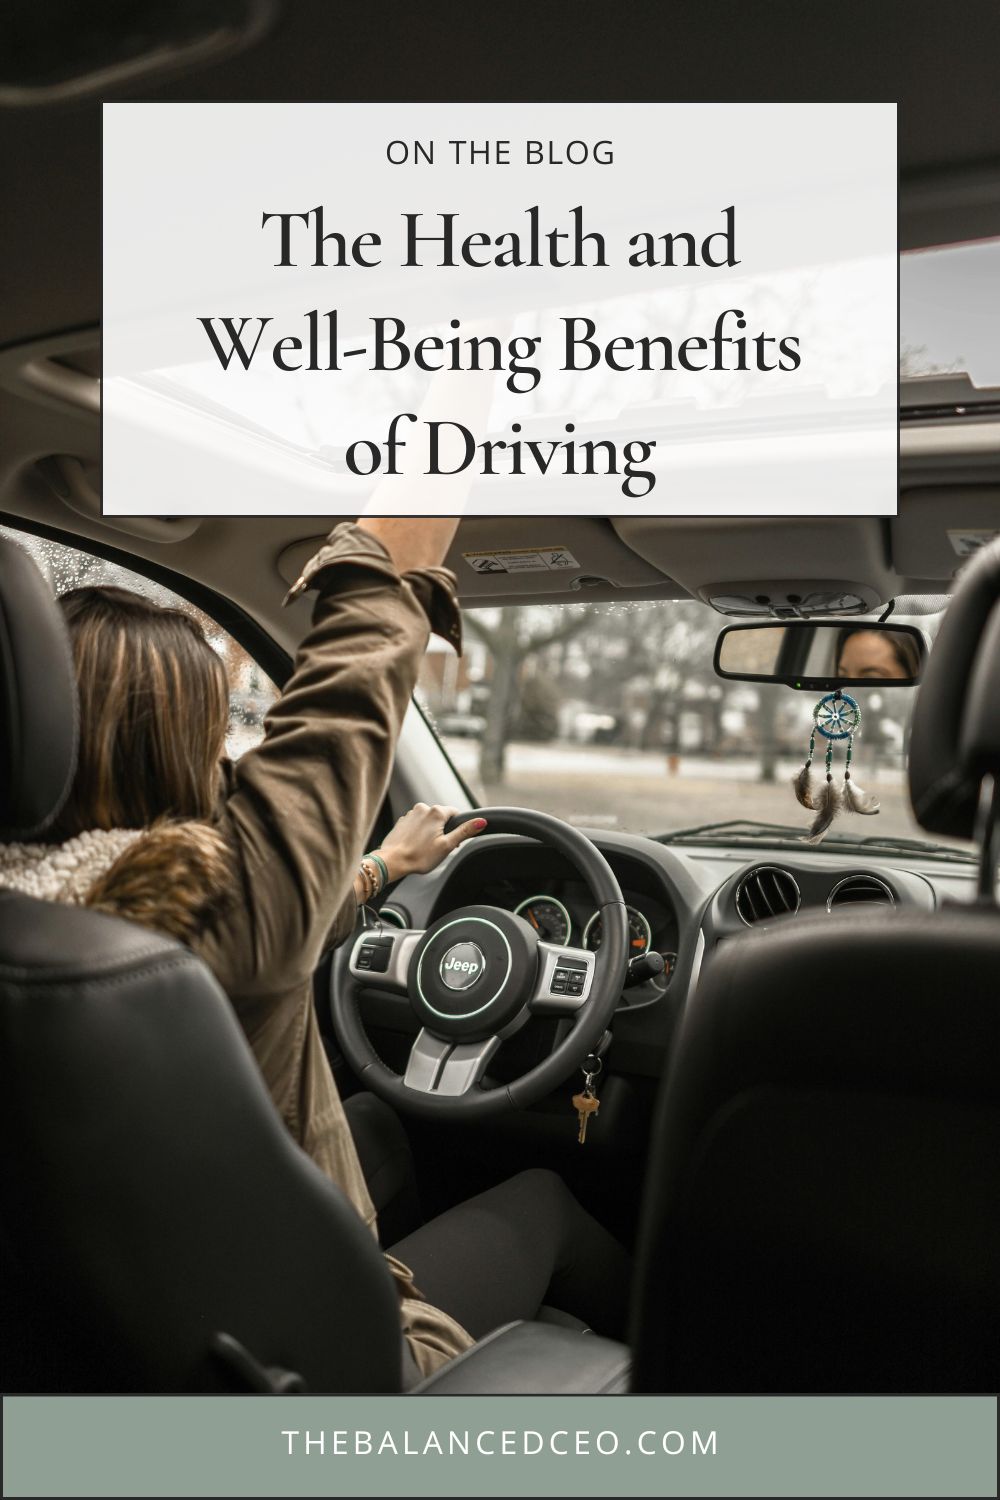 The Health and Well-Being Benefits of Driving